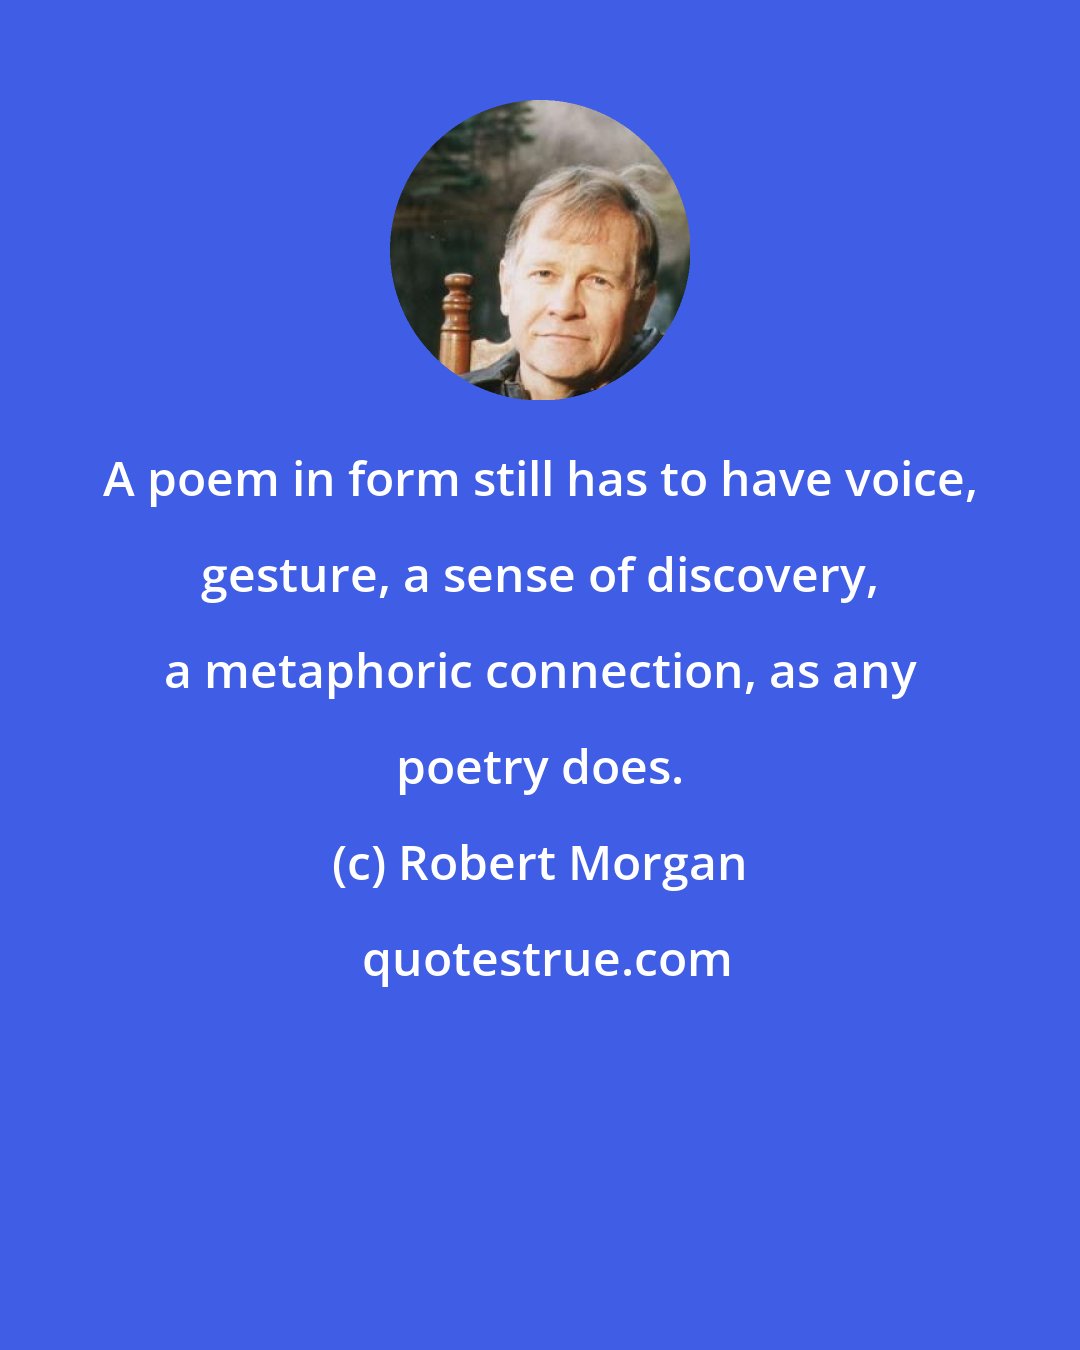 Robert Morgan: A poem in form still has to have voice, gesture, a sense of discovery, a metaphoric connection, as any poetry does.